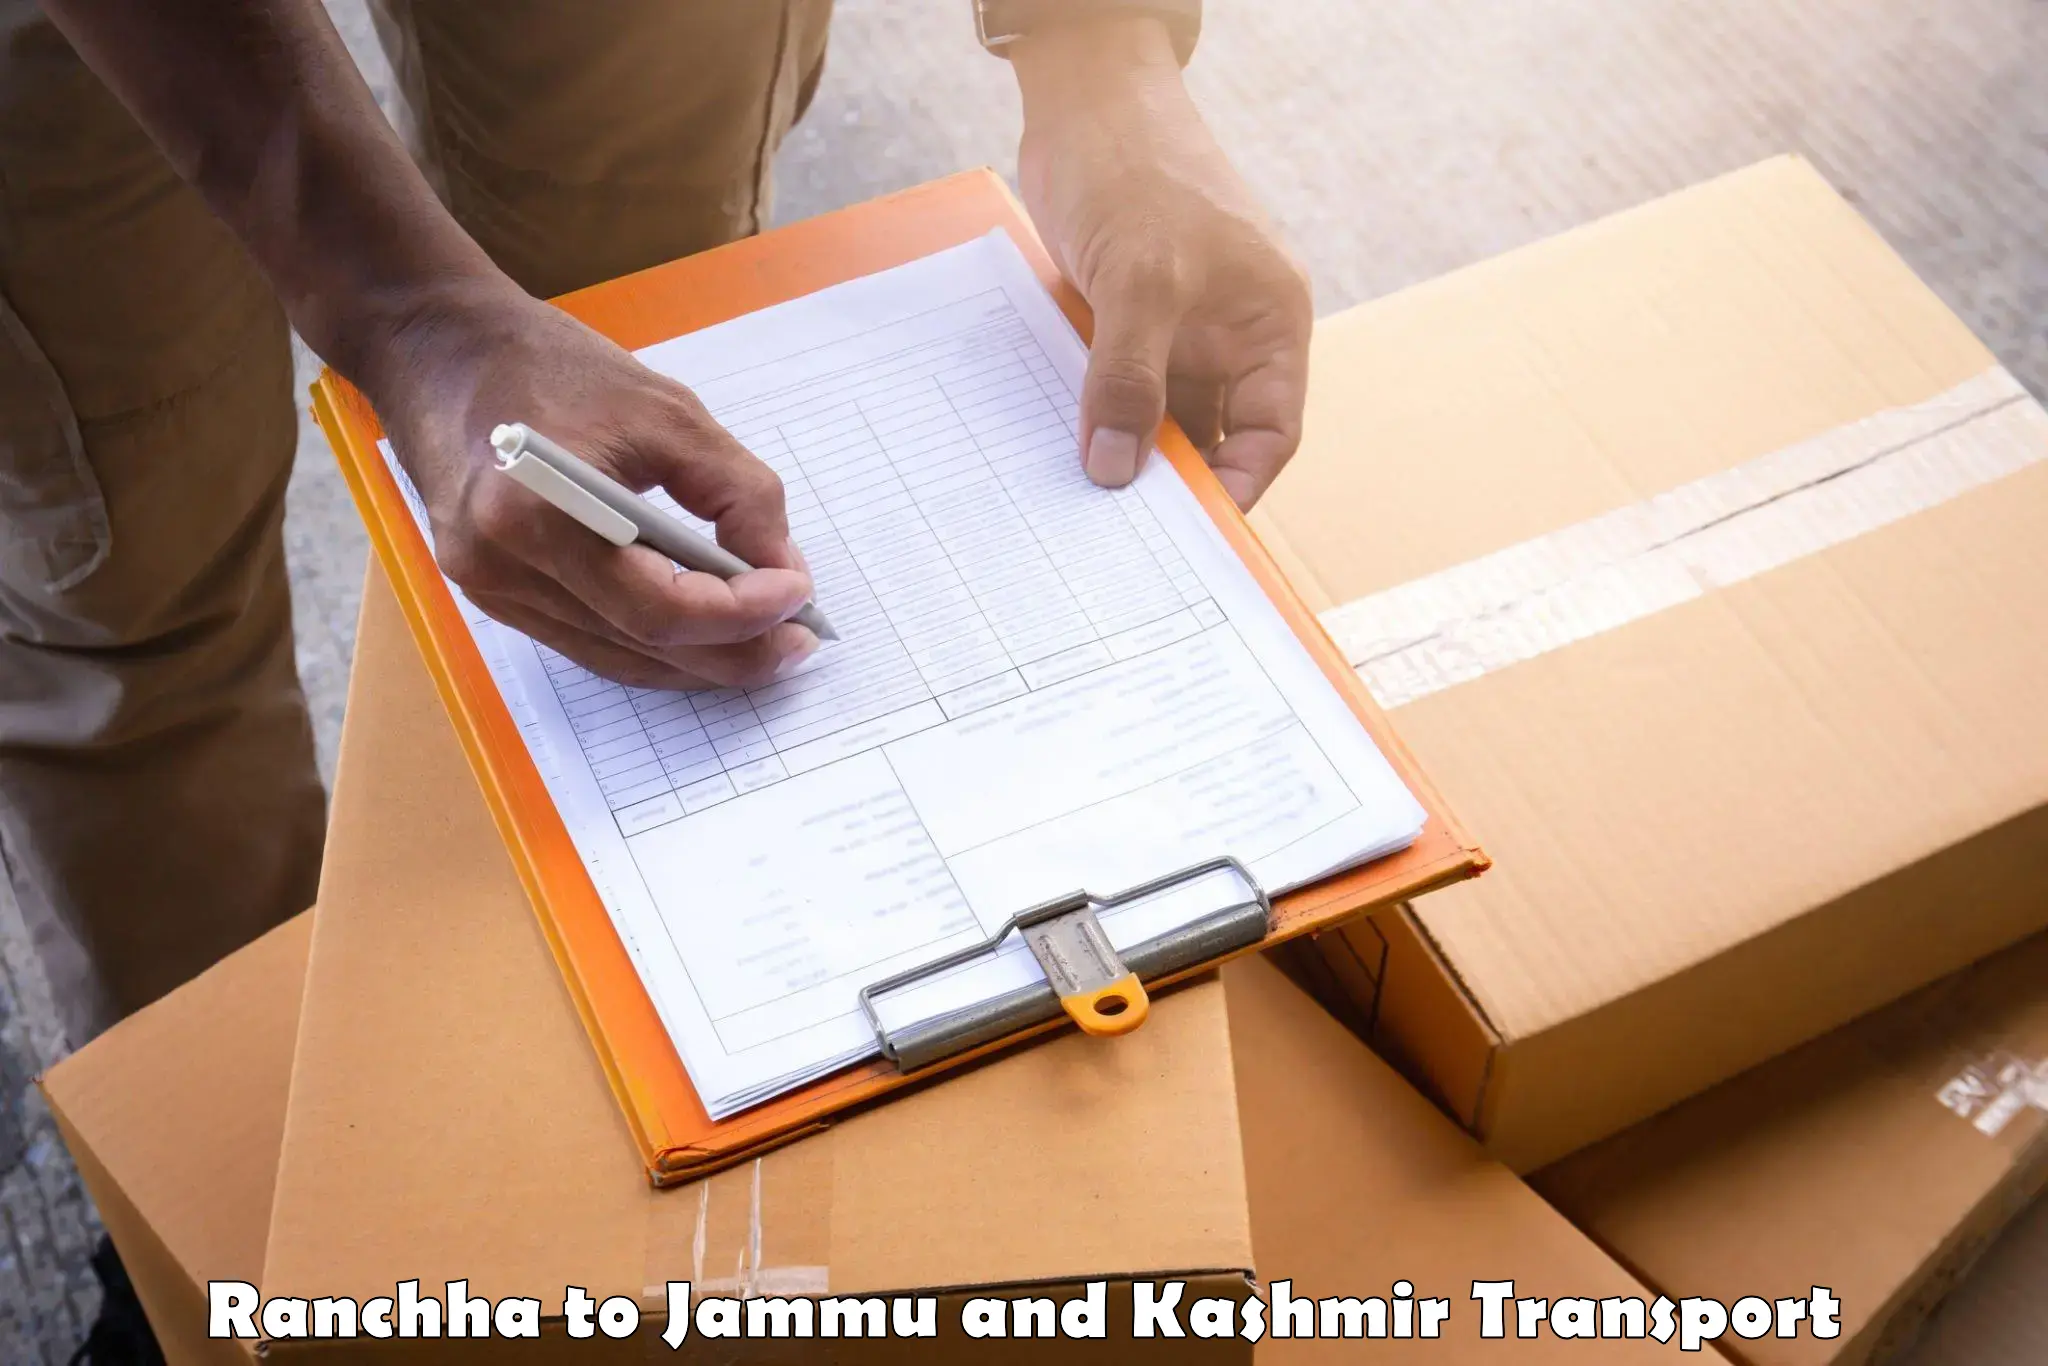 Truck transport companies in India in Ranchha to Jammu